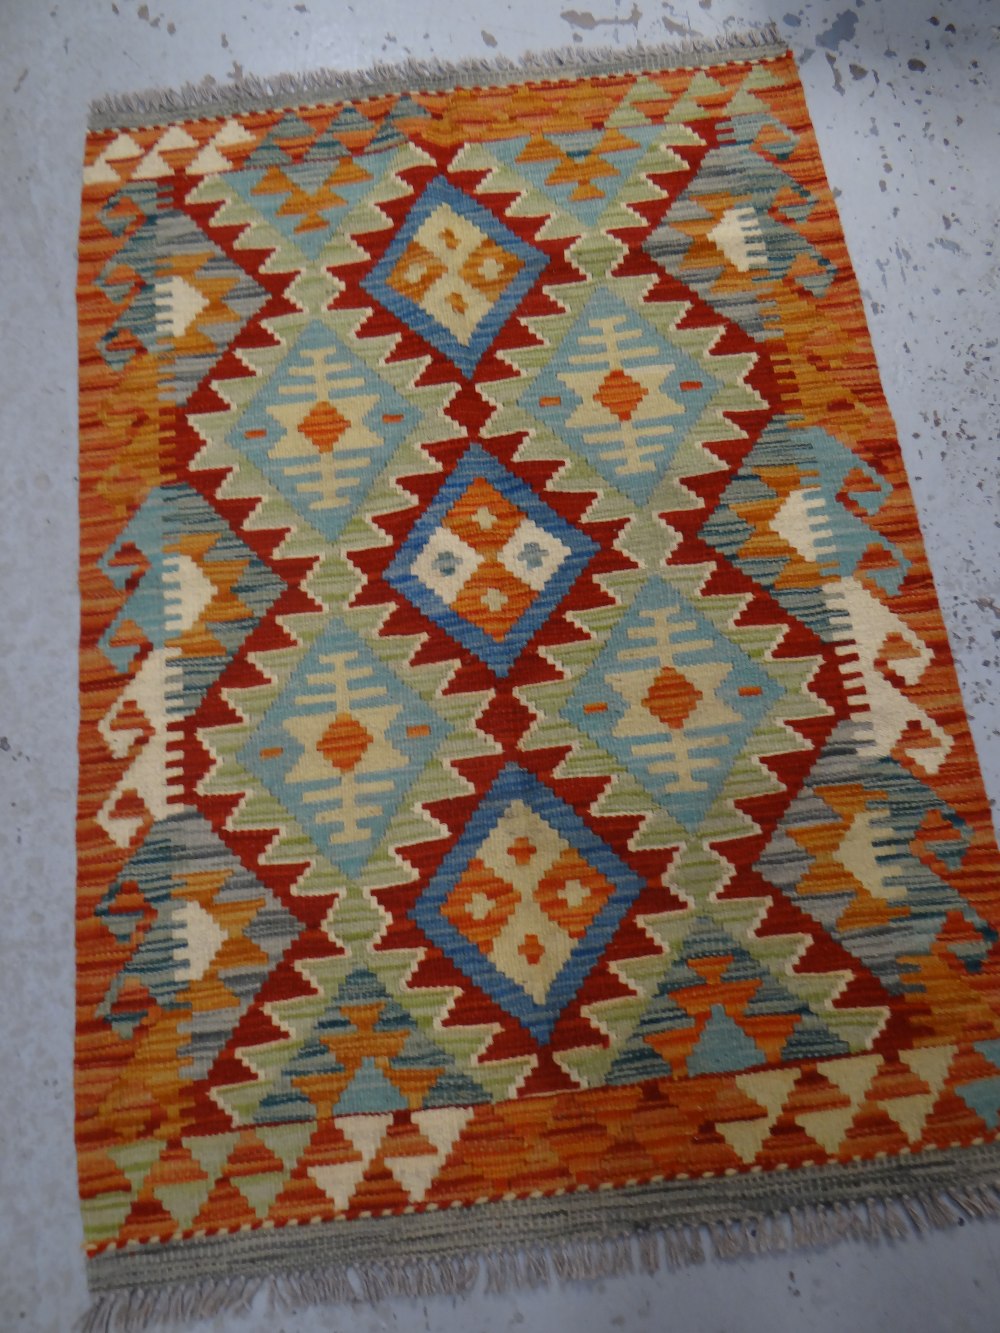 Vegetable-dye wool Chobi Kilim runner, 120 x 81cms Condition reports provided on request by email